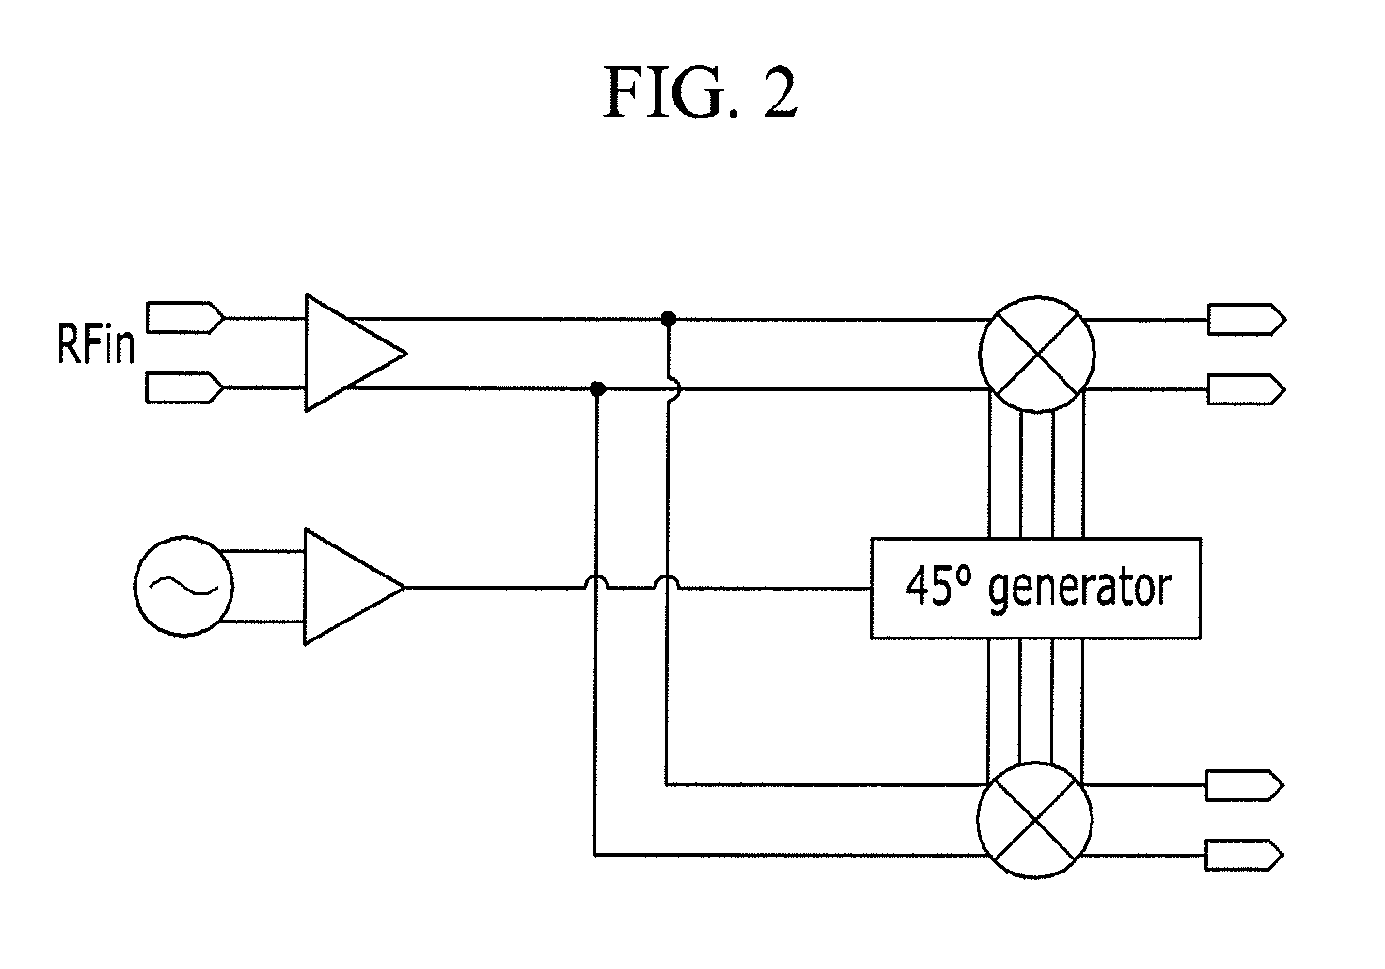 Ultrahigh frequency i/q sender/receiver using multi-stage harmonic mixer